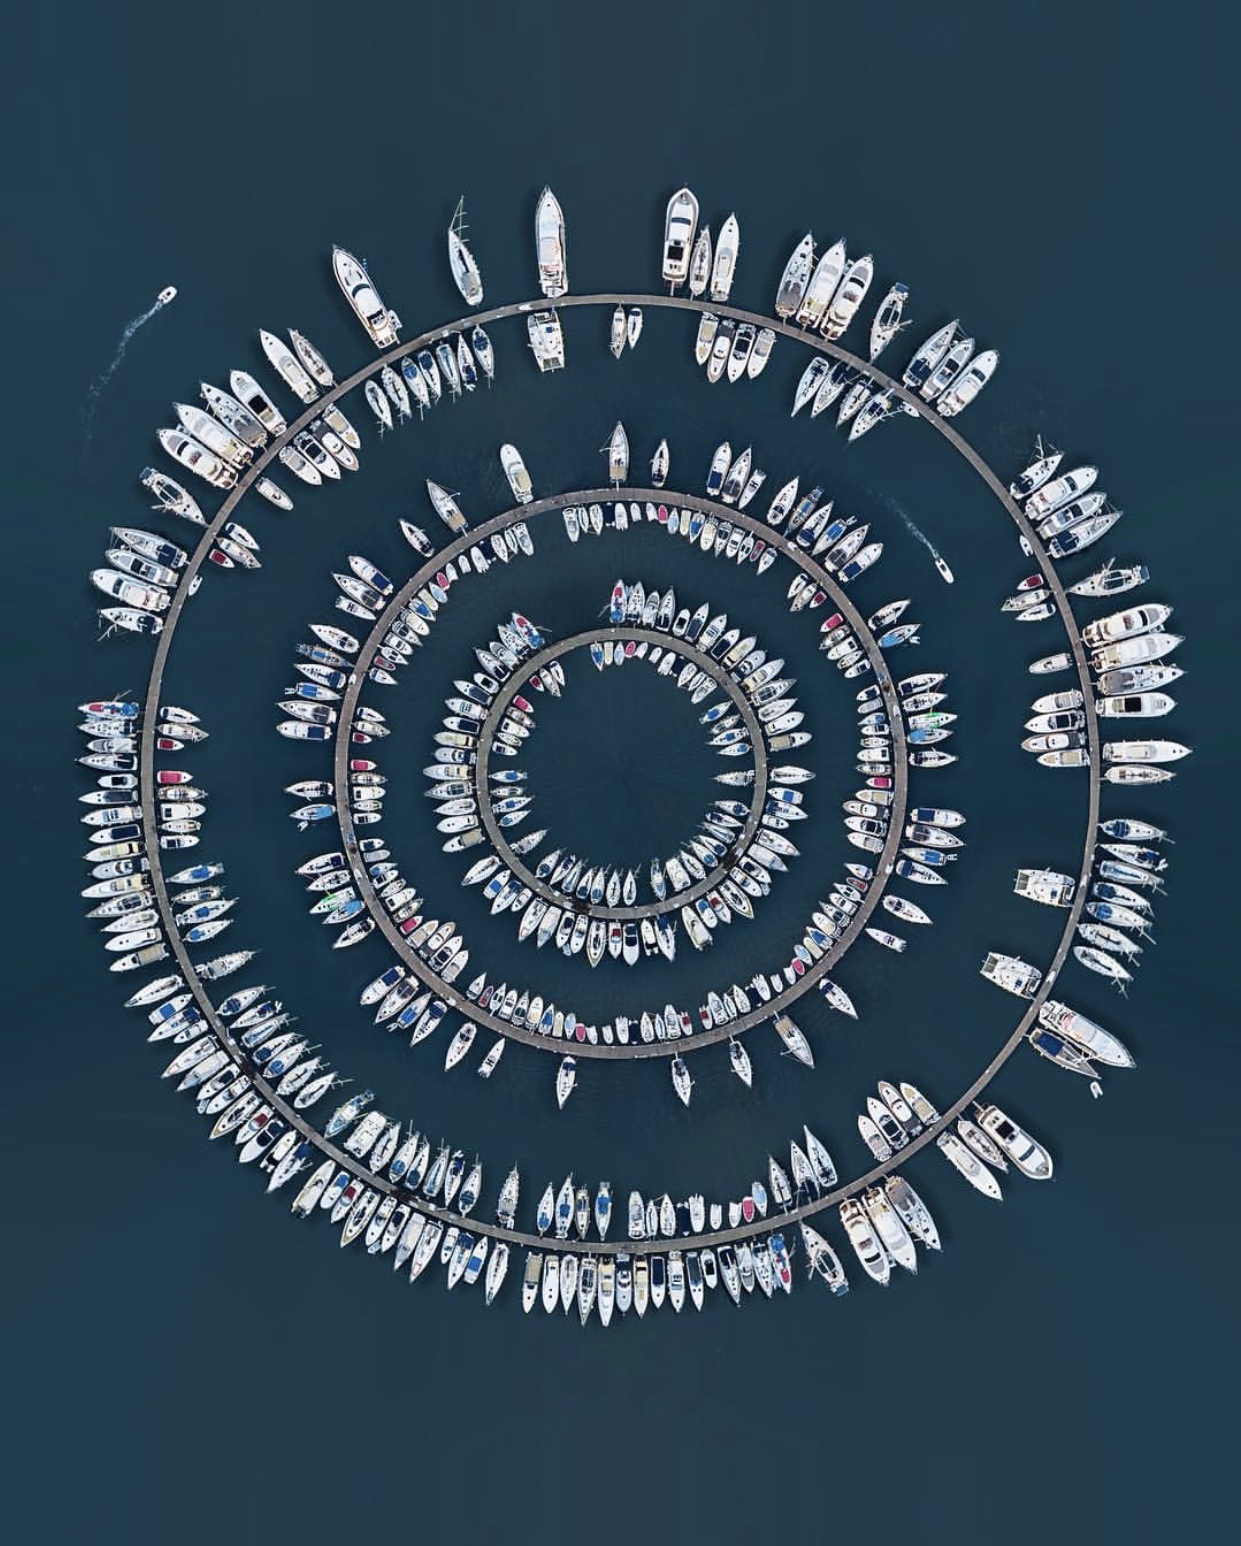 Costas Spatis took this photo with a Mavic Pro, and its settings were sensitivity set to 100, shutter speed set to 350, and aperture 0.4. The main shot was a straight row of ships on a calm Greek coast. To create this effect, Spotis used Photoshop's Polar Coordinates tool and made it look like this. Most of his works are about the sea and he is very interested in symmetry.